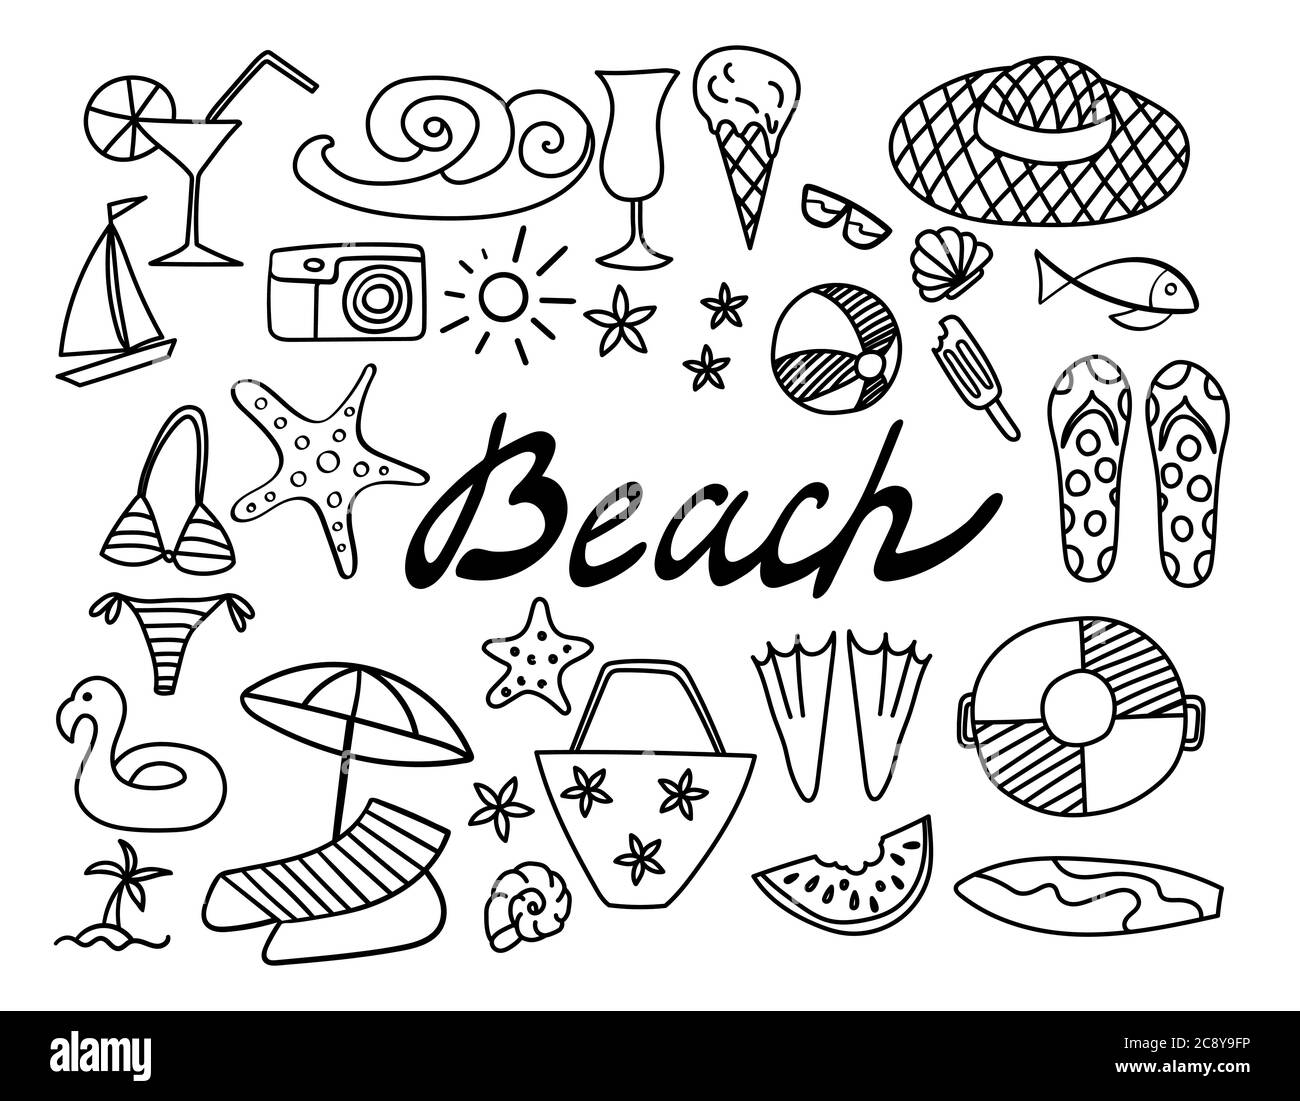 Summer beach hand drawn icons. Vacation doodles isolated on white background. Stock Vector